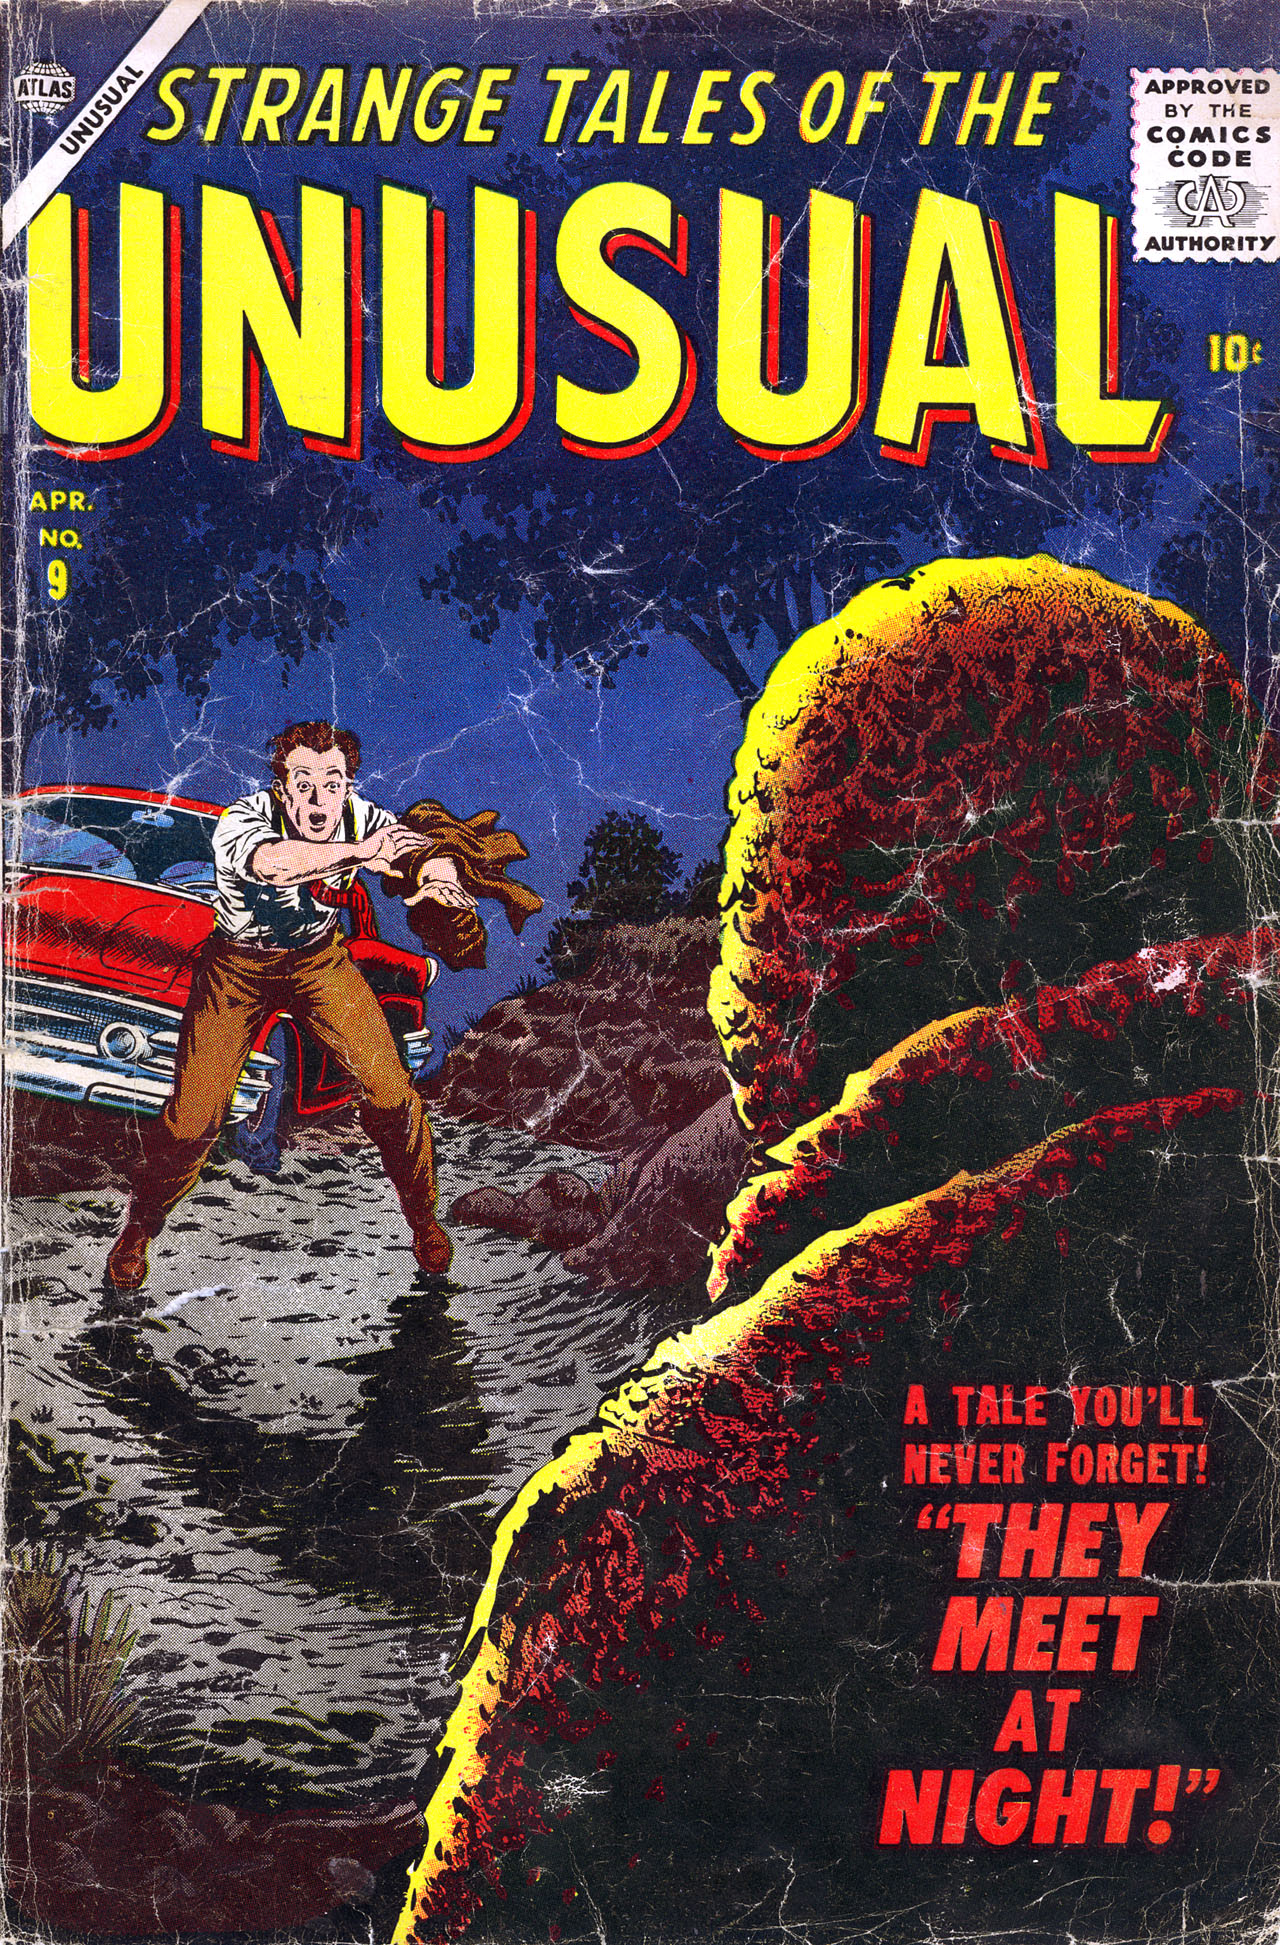 Read online Strange Tales of the Unusual comic -  Issue #9 - 1